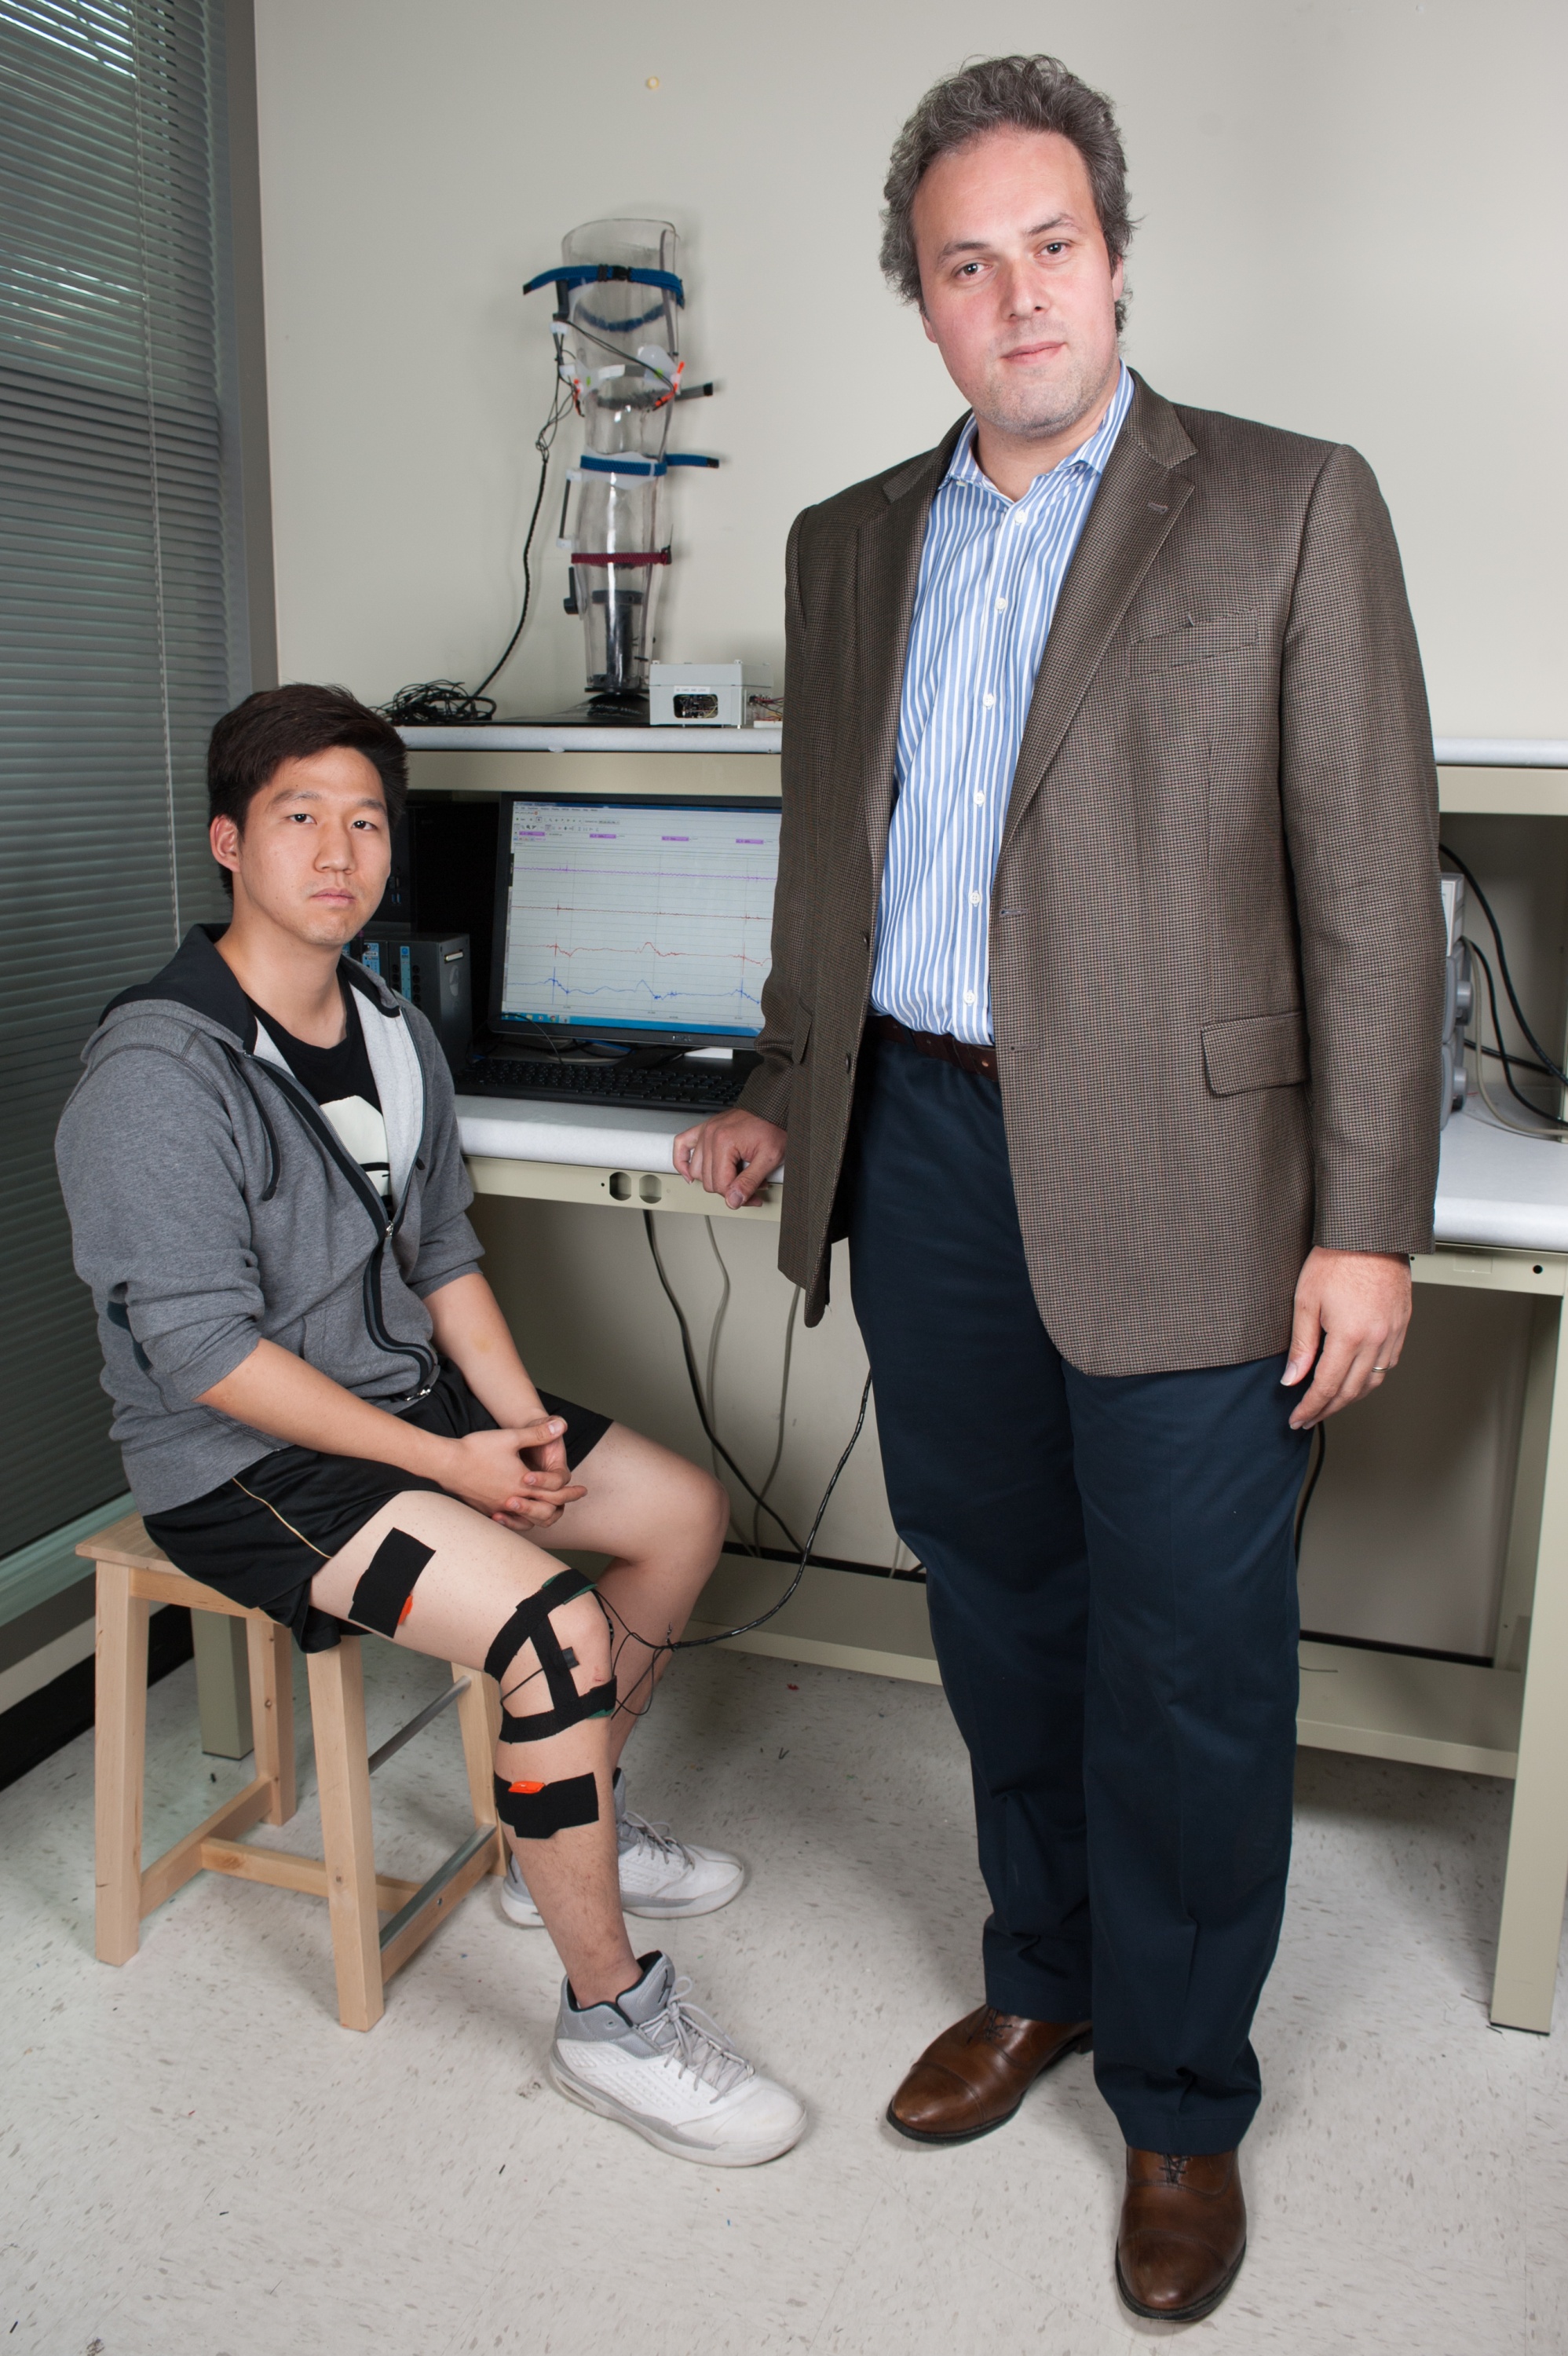 Former NCAA discuss thrower Prof. Omer Inan is working on a knee band that listens to crunchy sounds coming from the joint. Acoustic electronics turn them into moving graphs that may someday be medically useful.